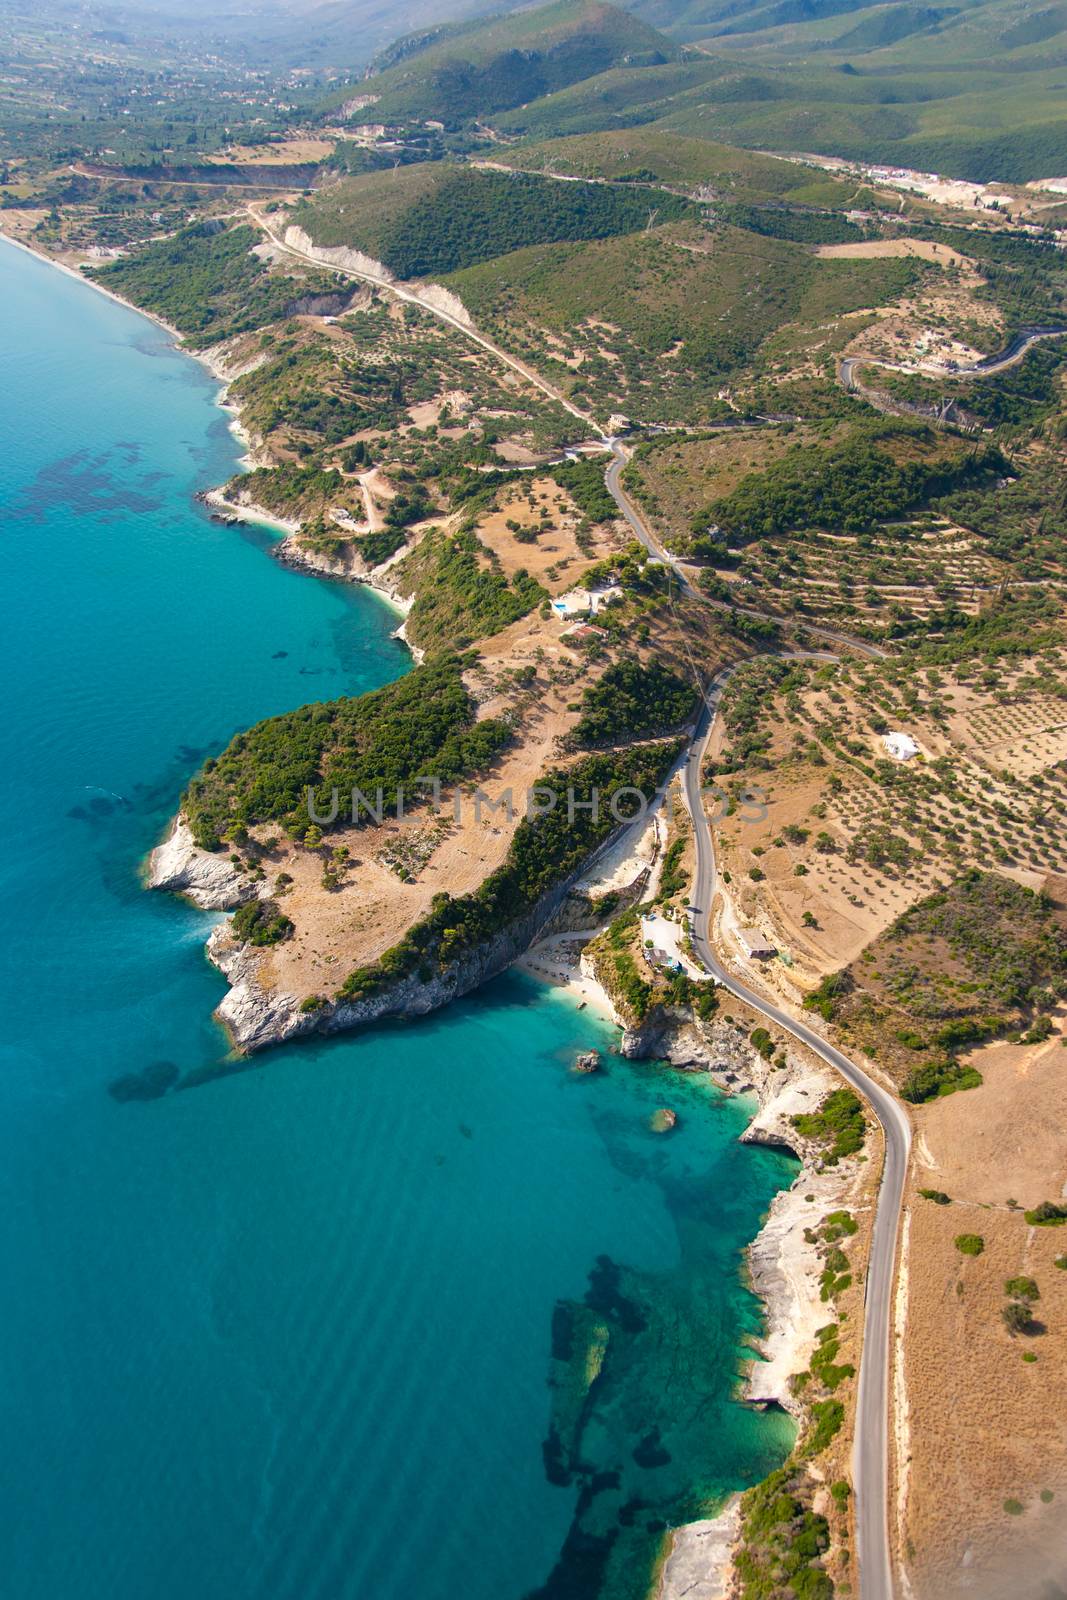 the island of Zakynthos Greece from the air by Netfalls